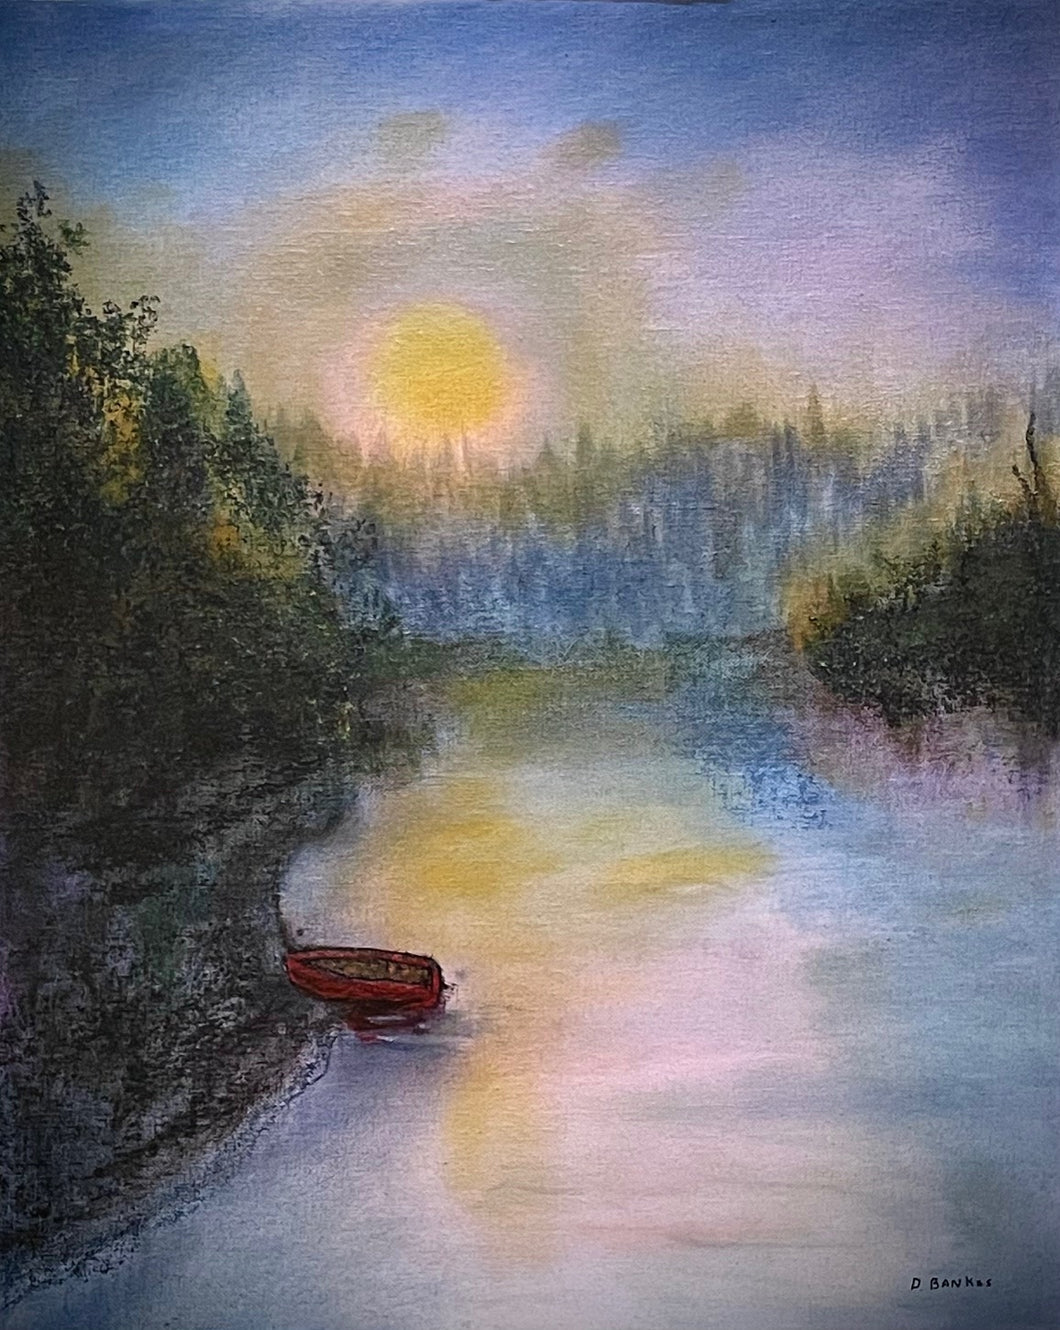 “The Little Red Boat”